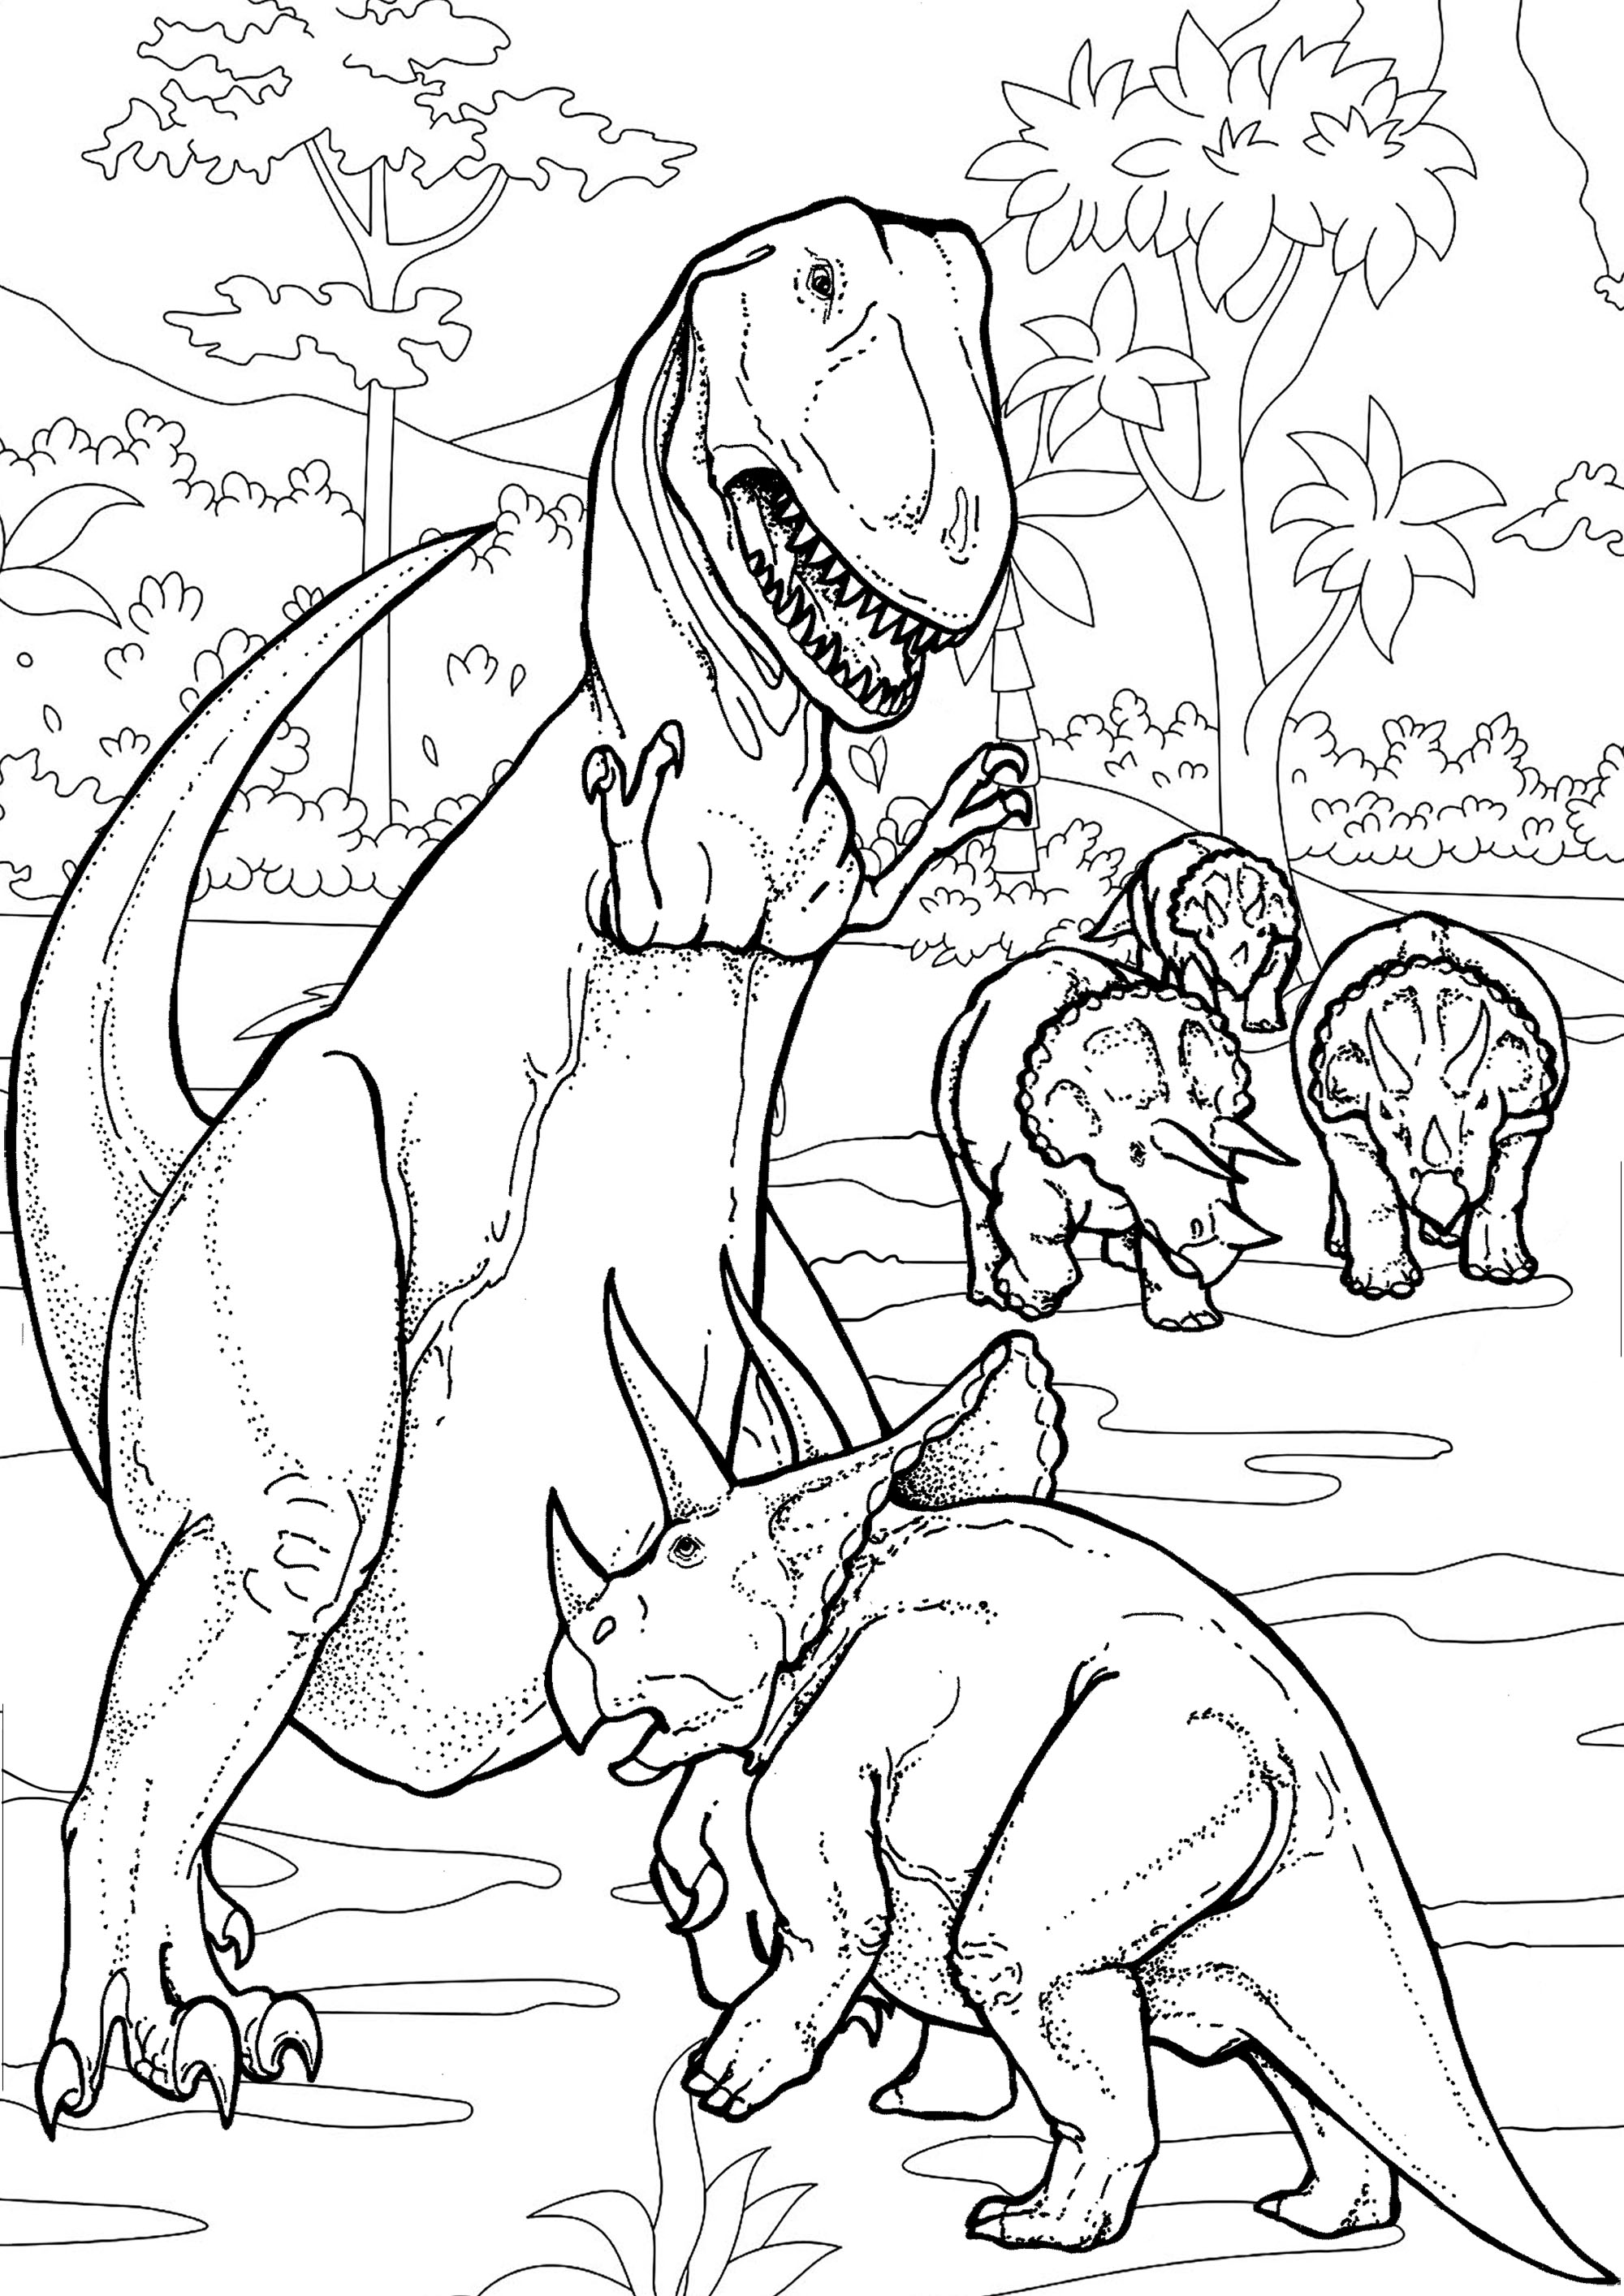 Download Dinosaurs Battle Dinosaurs Adult Coloring Pages